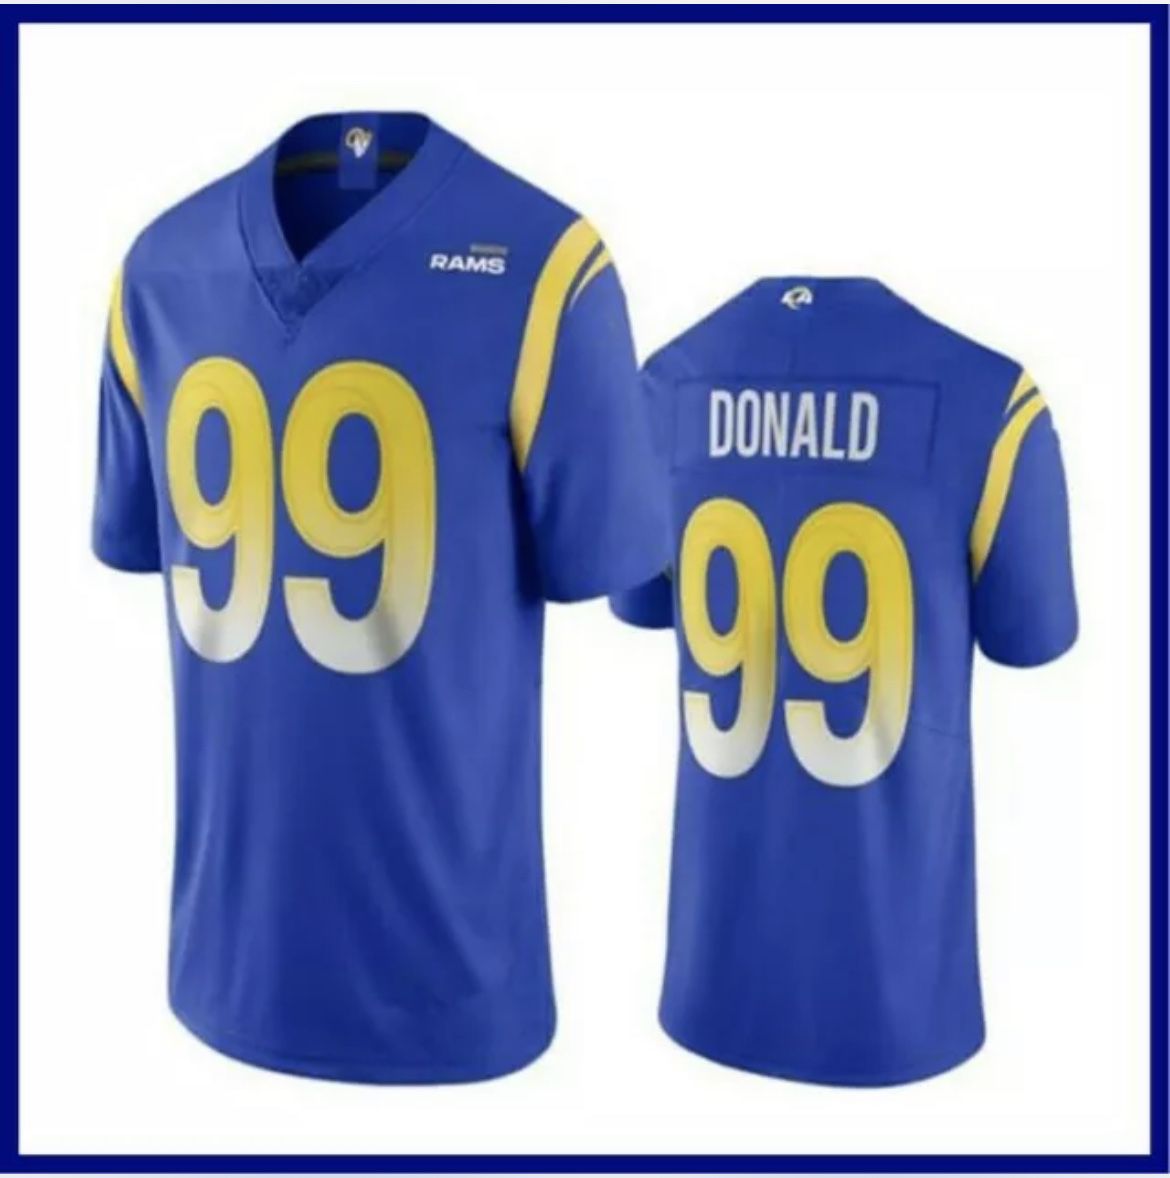 Rams Aaron Donald Jersey 2xx for Sale in South Gate, CA - OfferUp